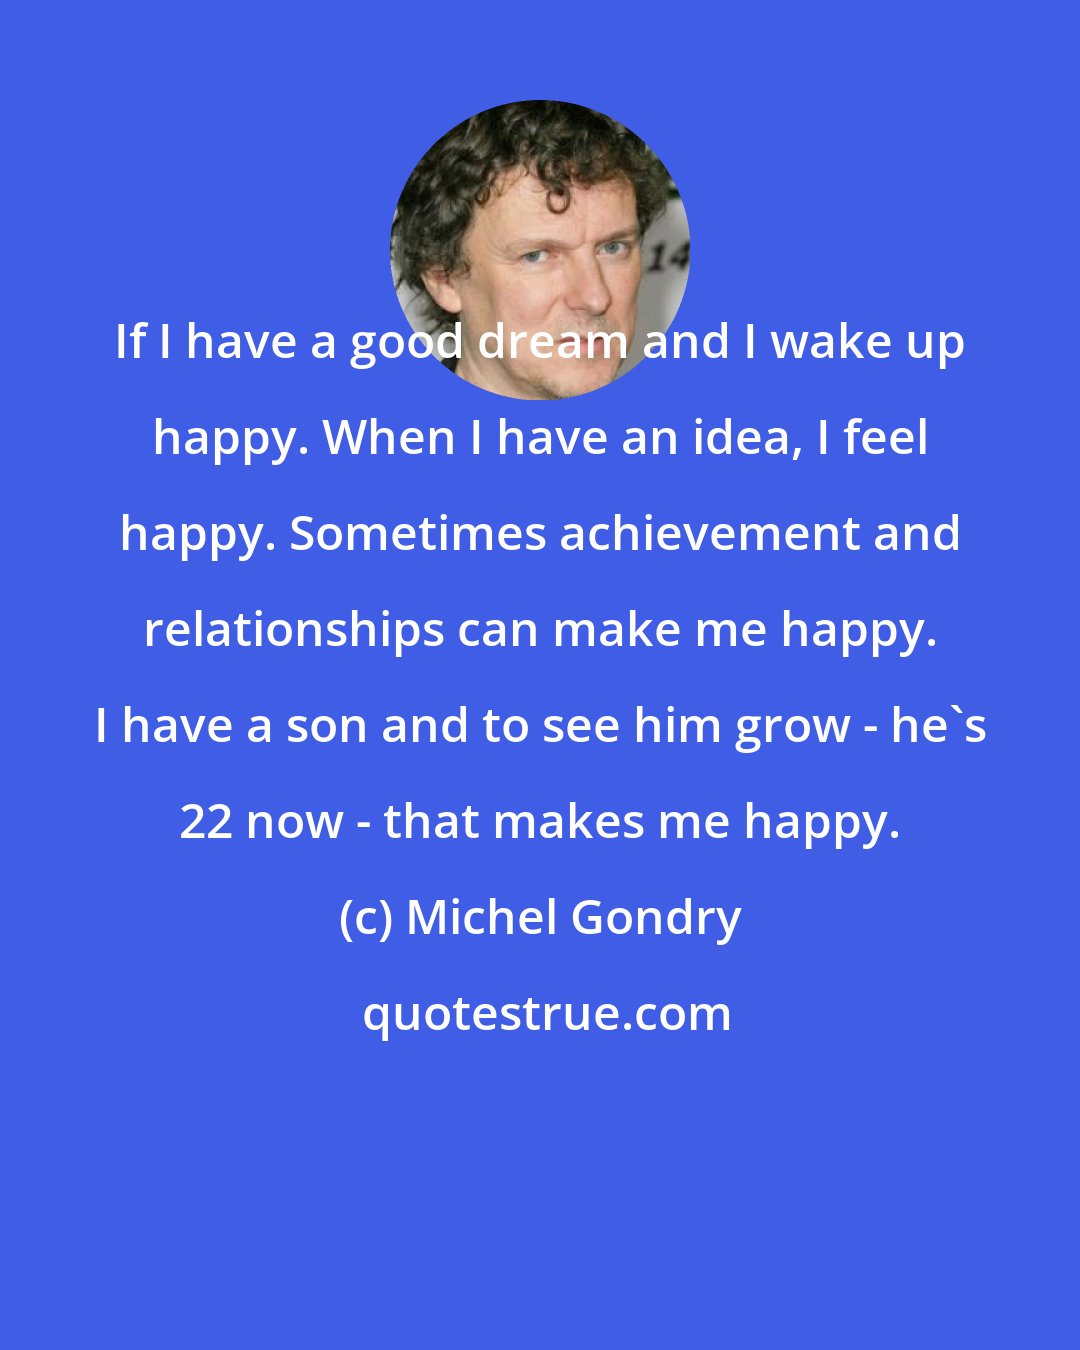 Michel Gondry: If I have a good dream and I wake up happy. When I have an idea, I feel happy. Sometimes achievement and relationships can make me happy. I have a son and to see him grow - he's 22 now - that makes me happy.